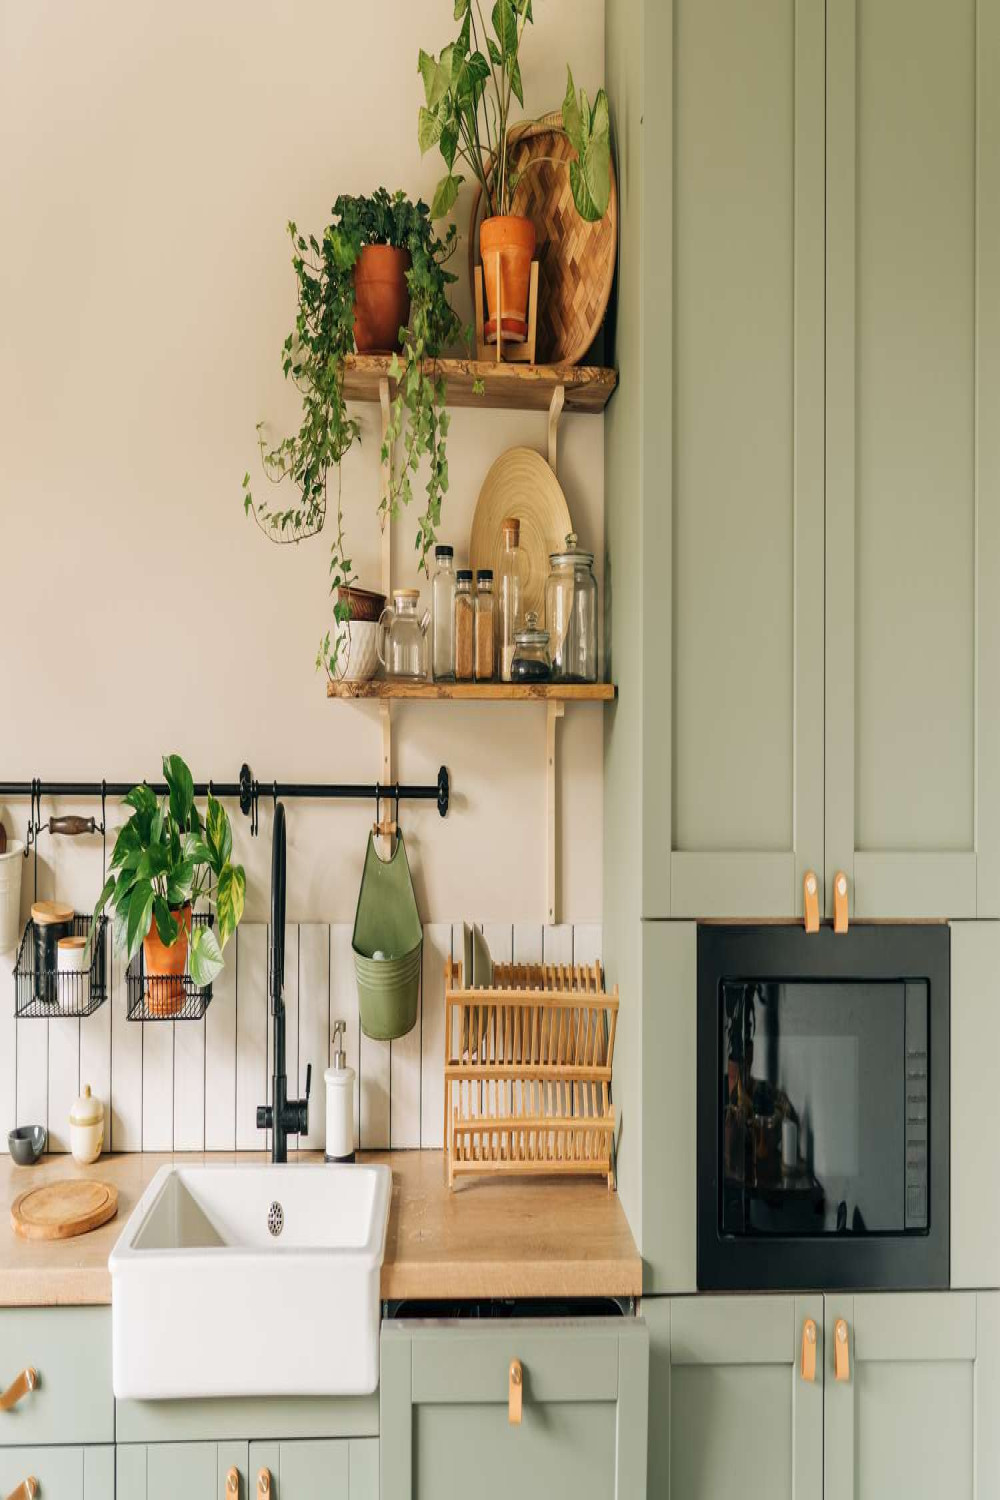 English Country Kitchens Are Trending—Here